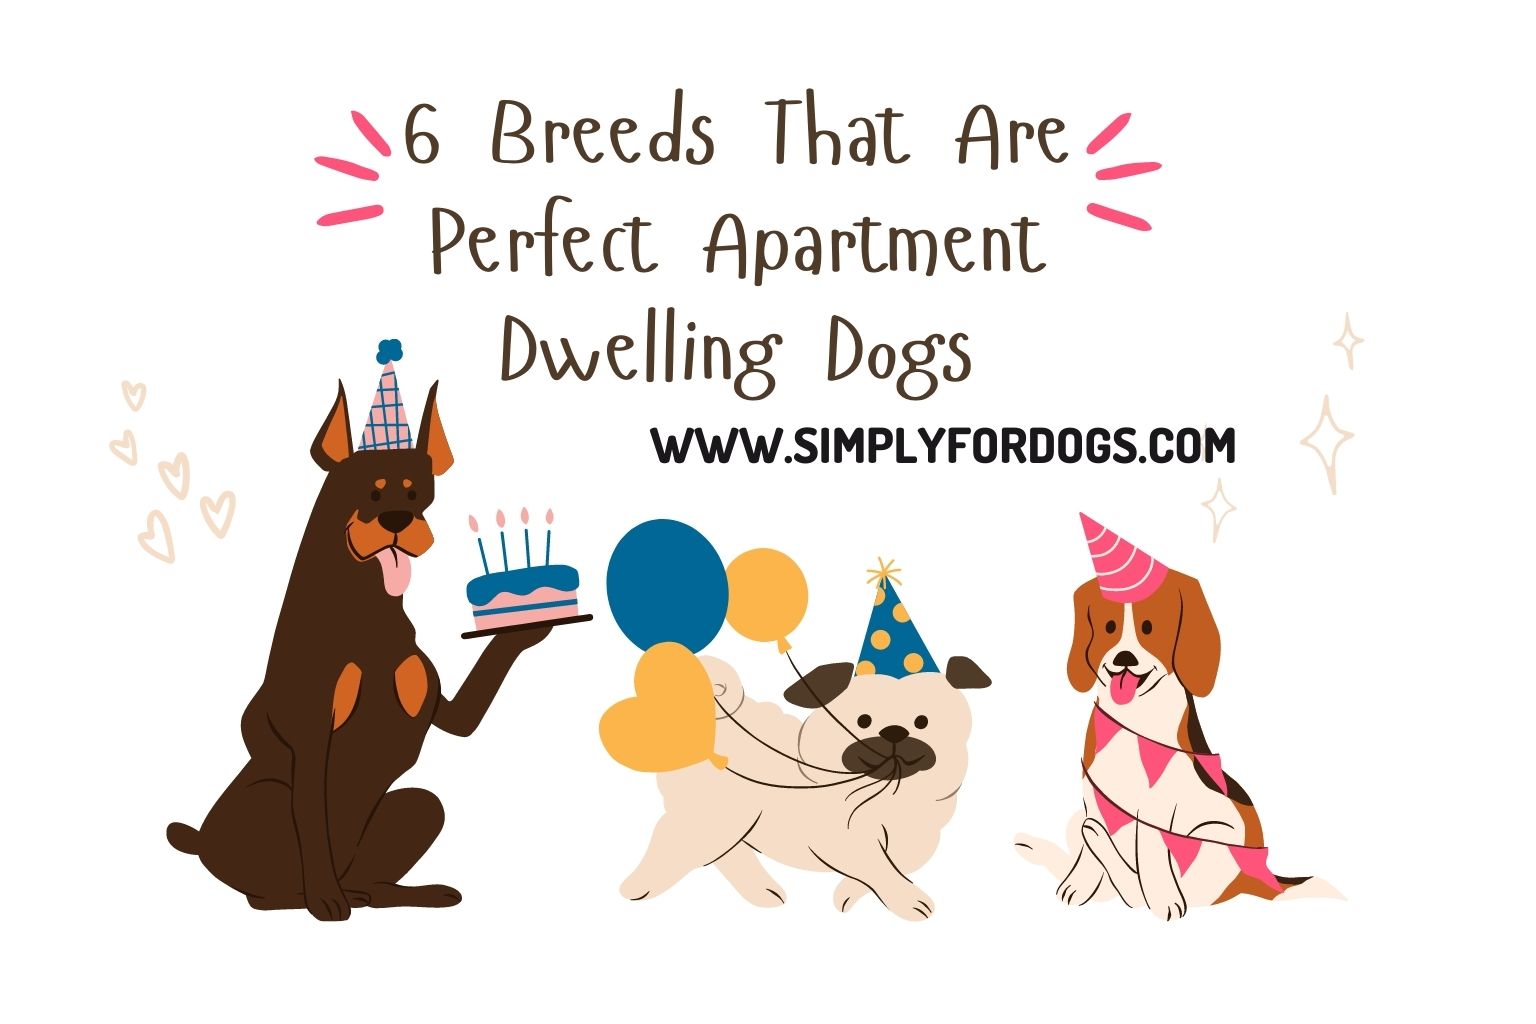 6 Breeds That Are Perfect Apartment Dwelling Dogs